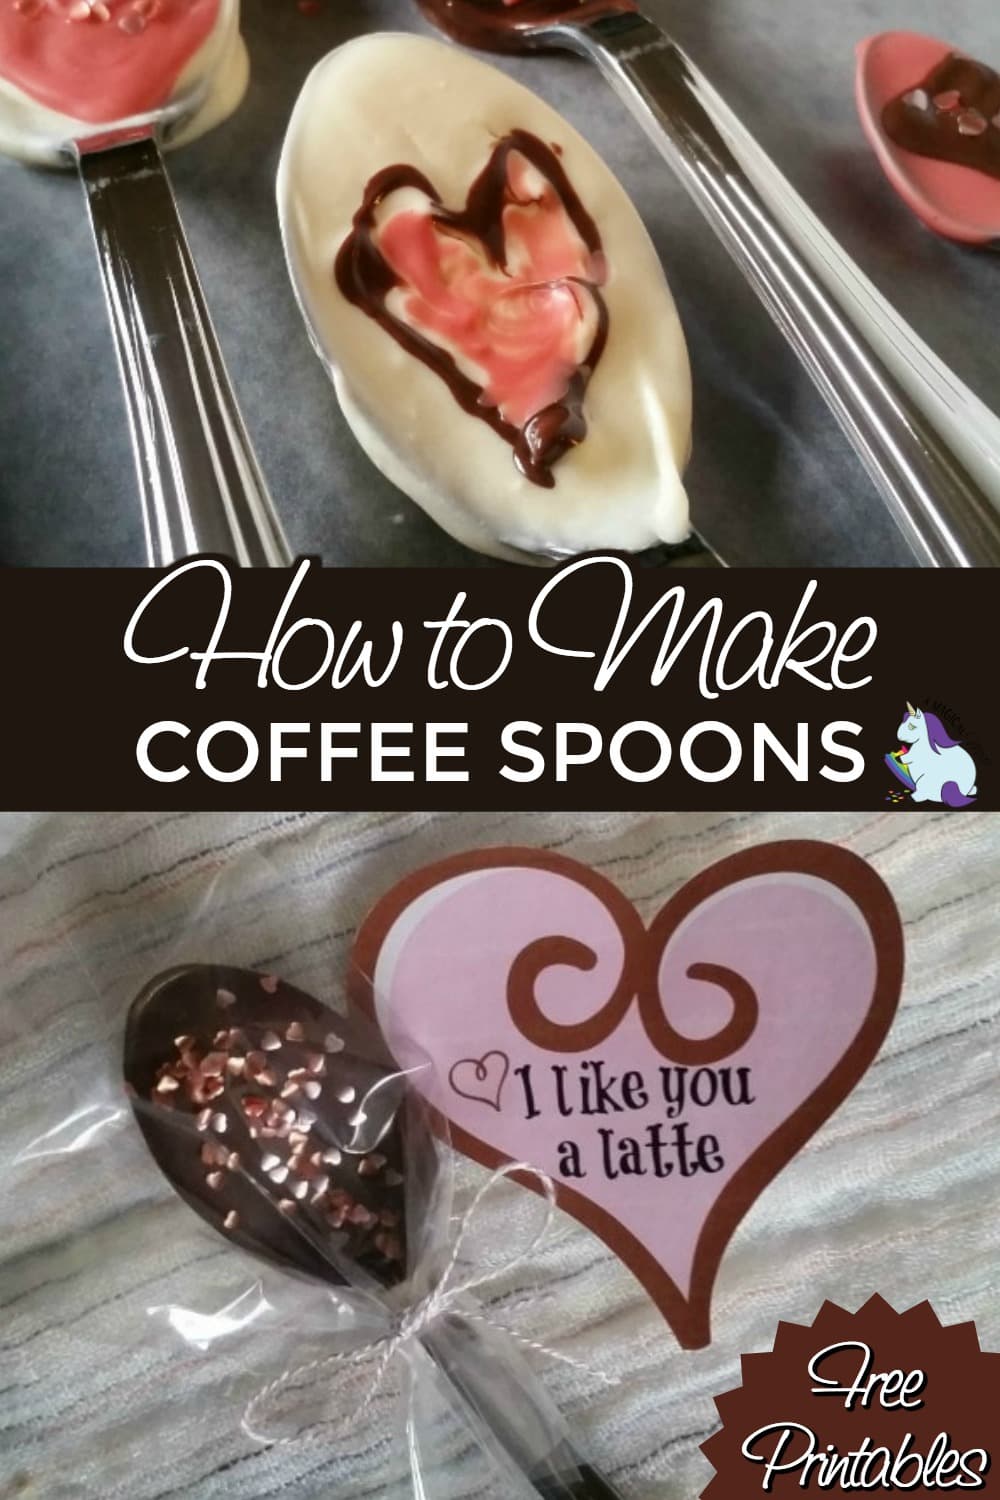 Chocolate covered coffee spoons with Valentine's day tags.